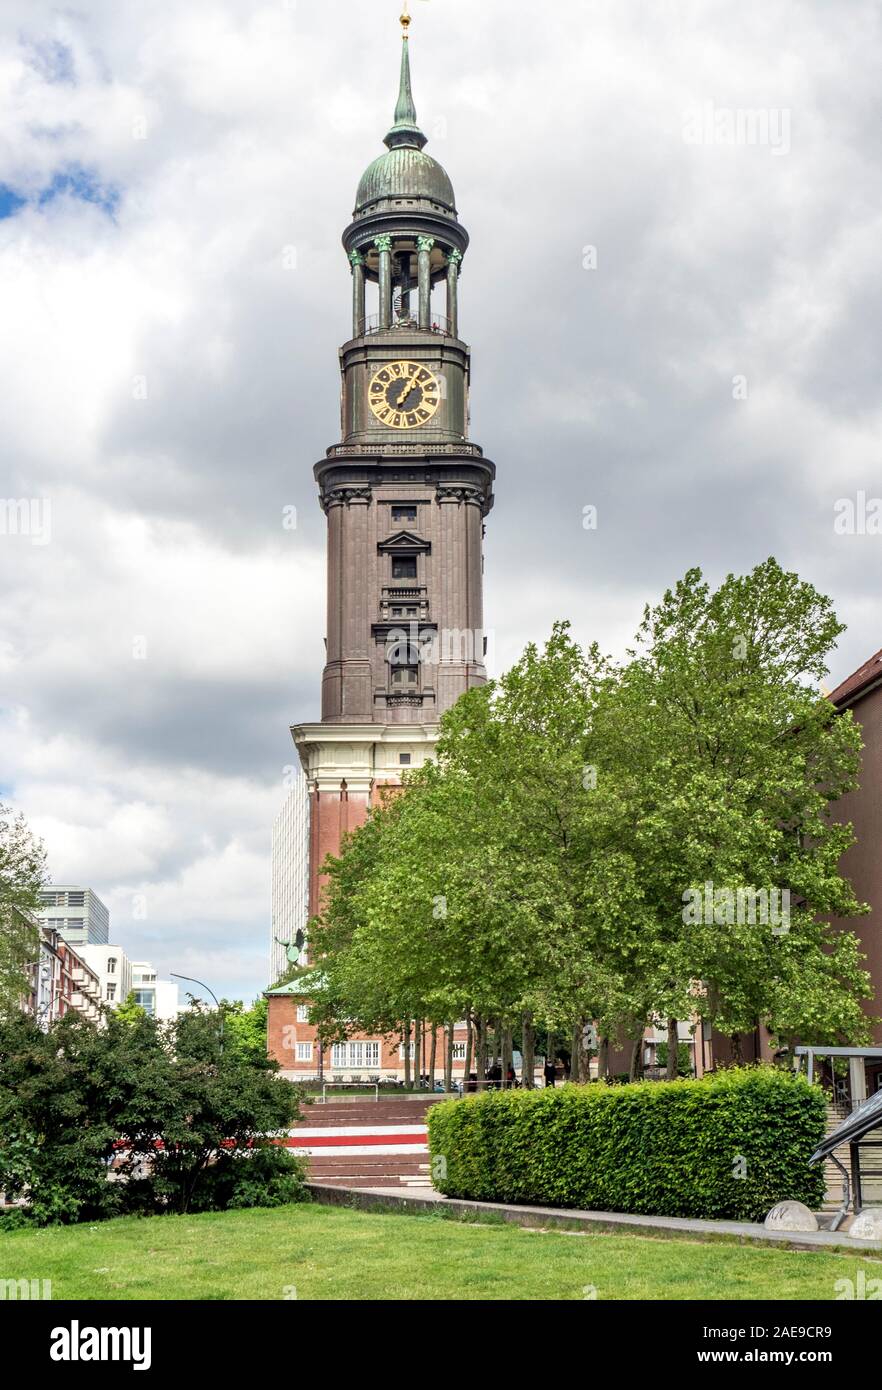 St. Michael's Lutheran Church and it's copper belfry and clock tower in Neustadt Hamburg Germany. Stock Photo